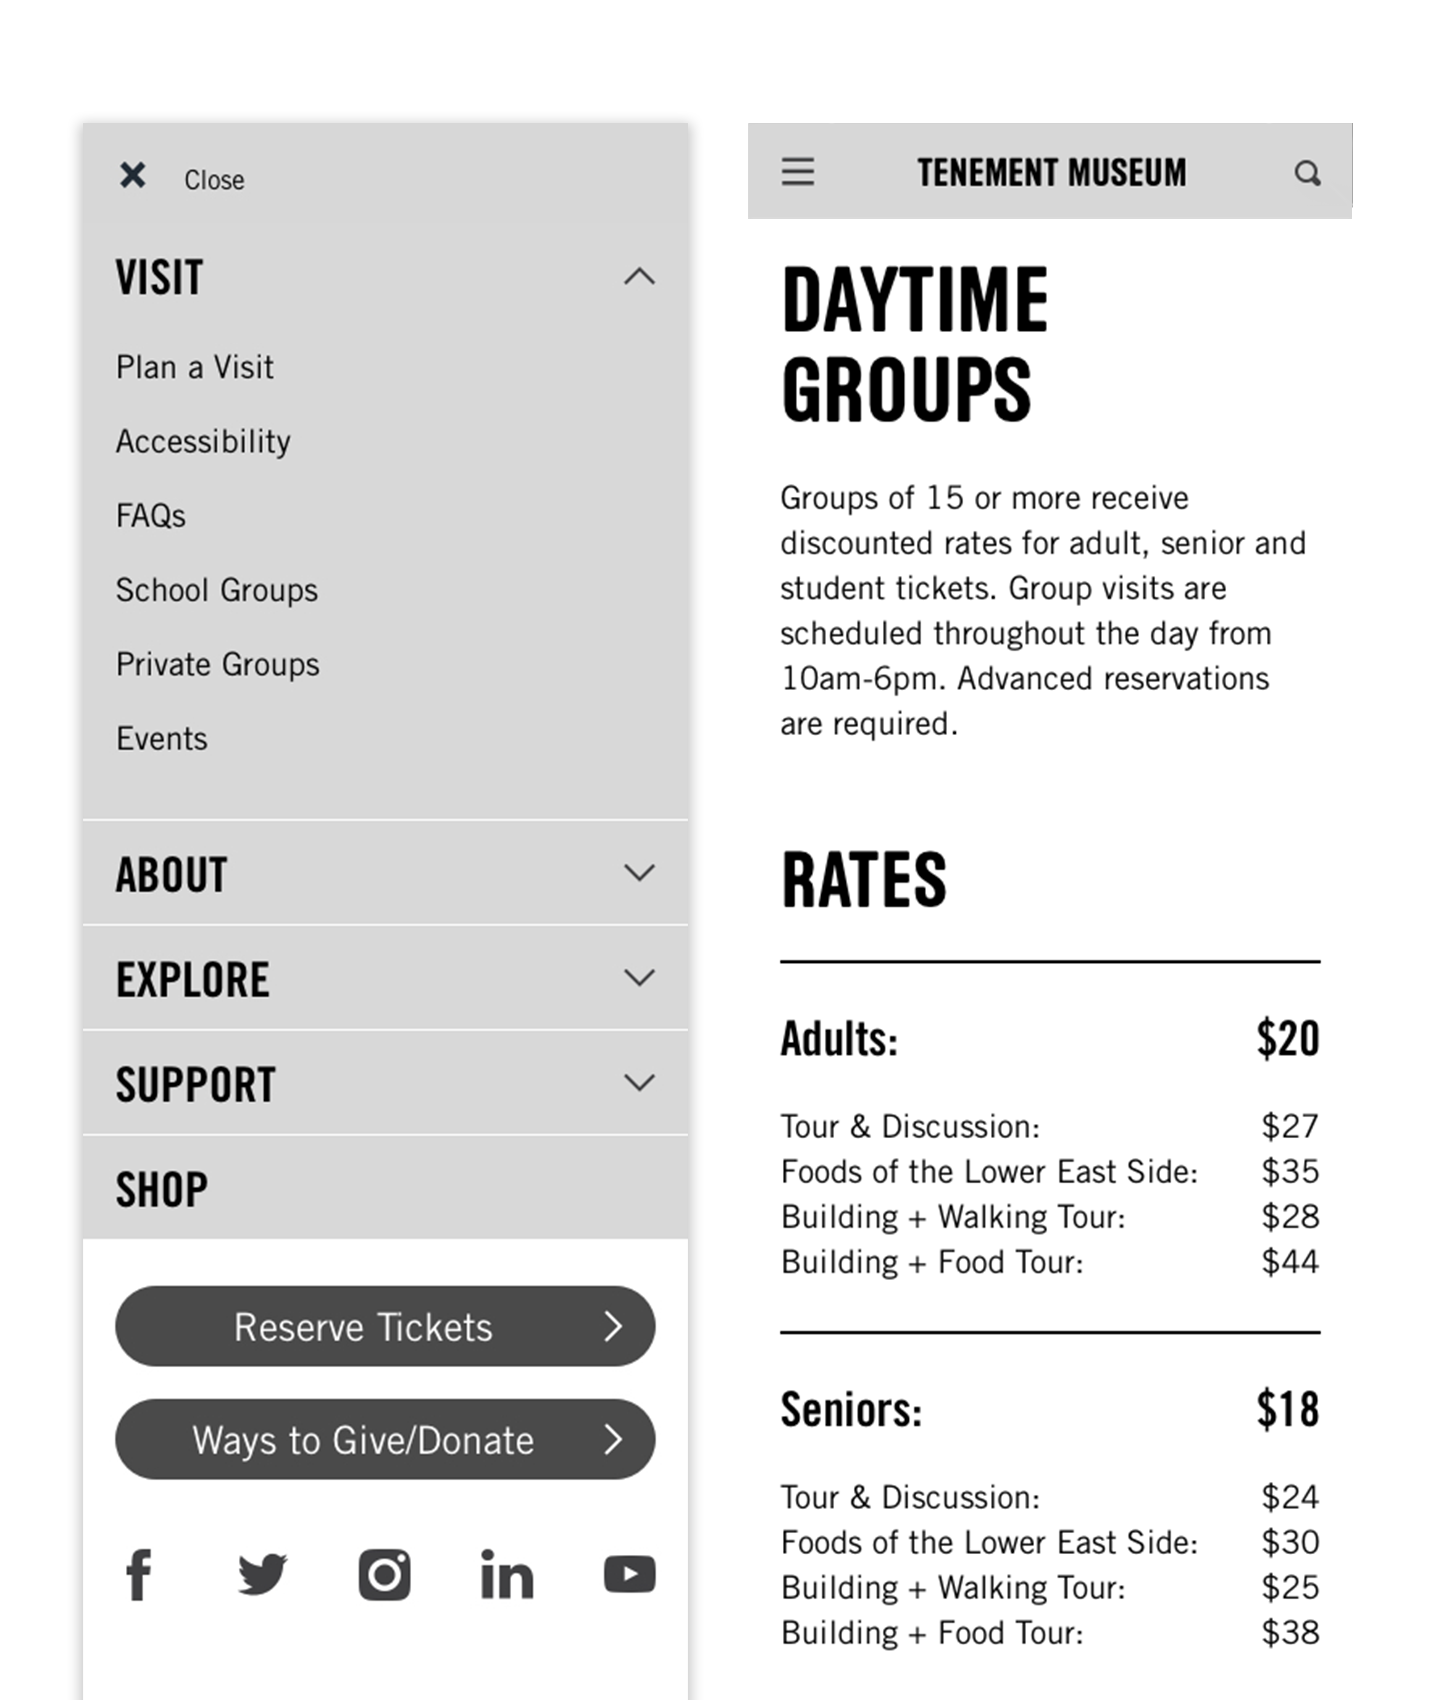 Wireframes for mobile navigation and information for group visits.